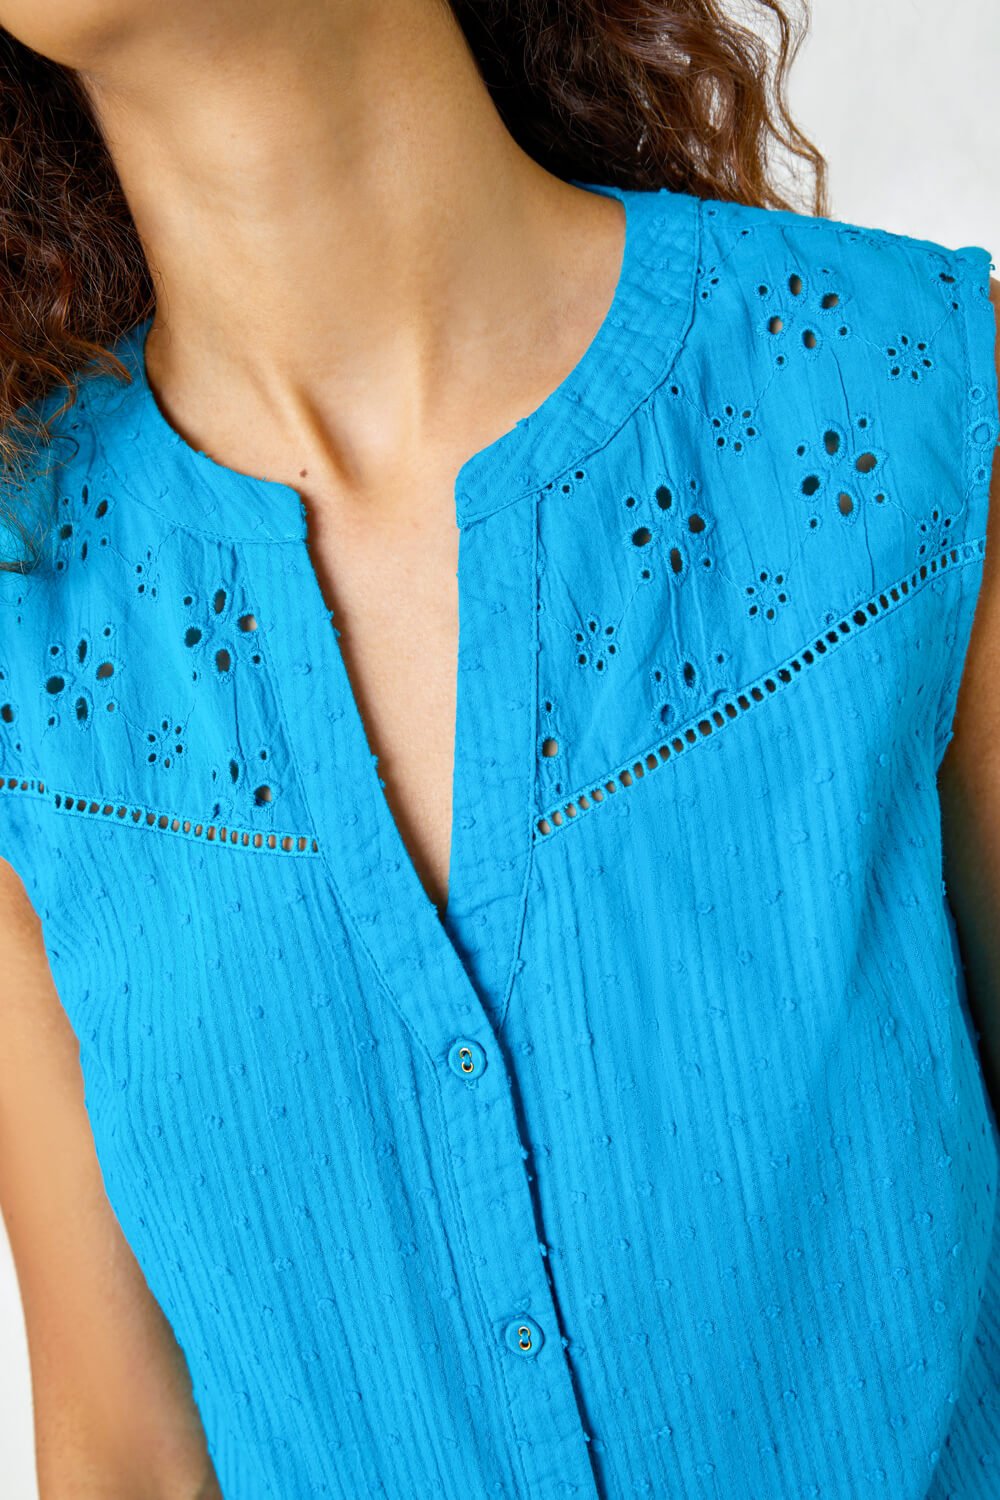 Teal Sleeveless Embroidered Cotton Blouse, Image 5 of 5